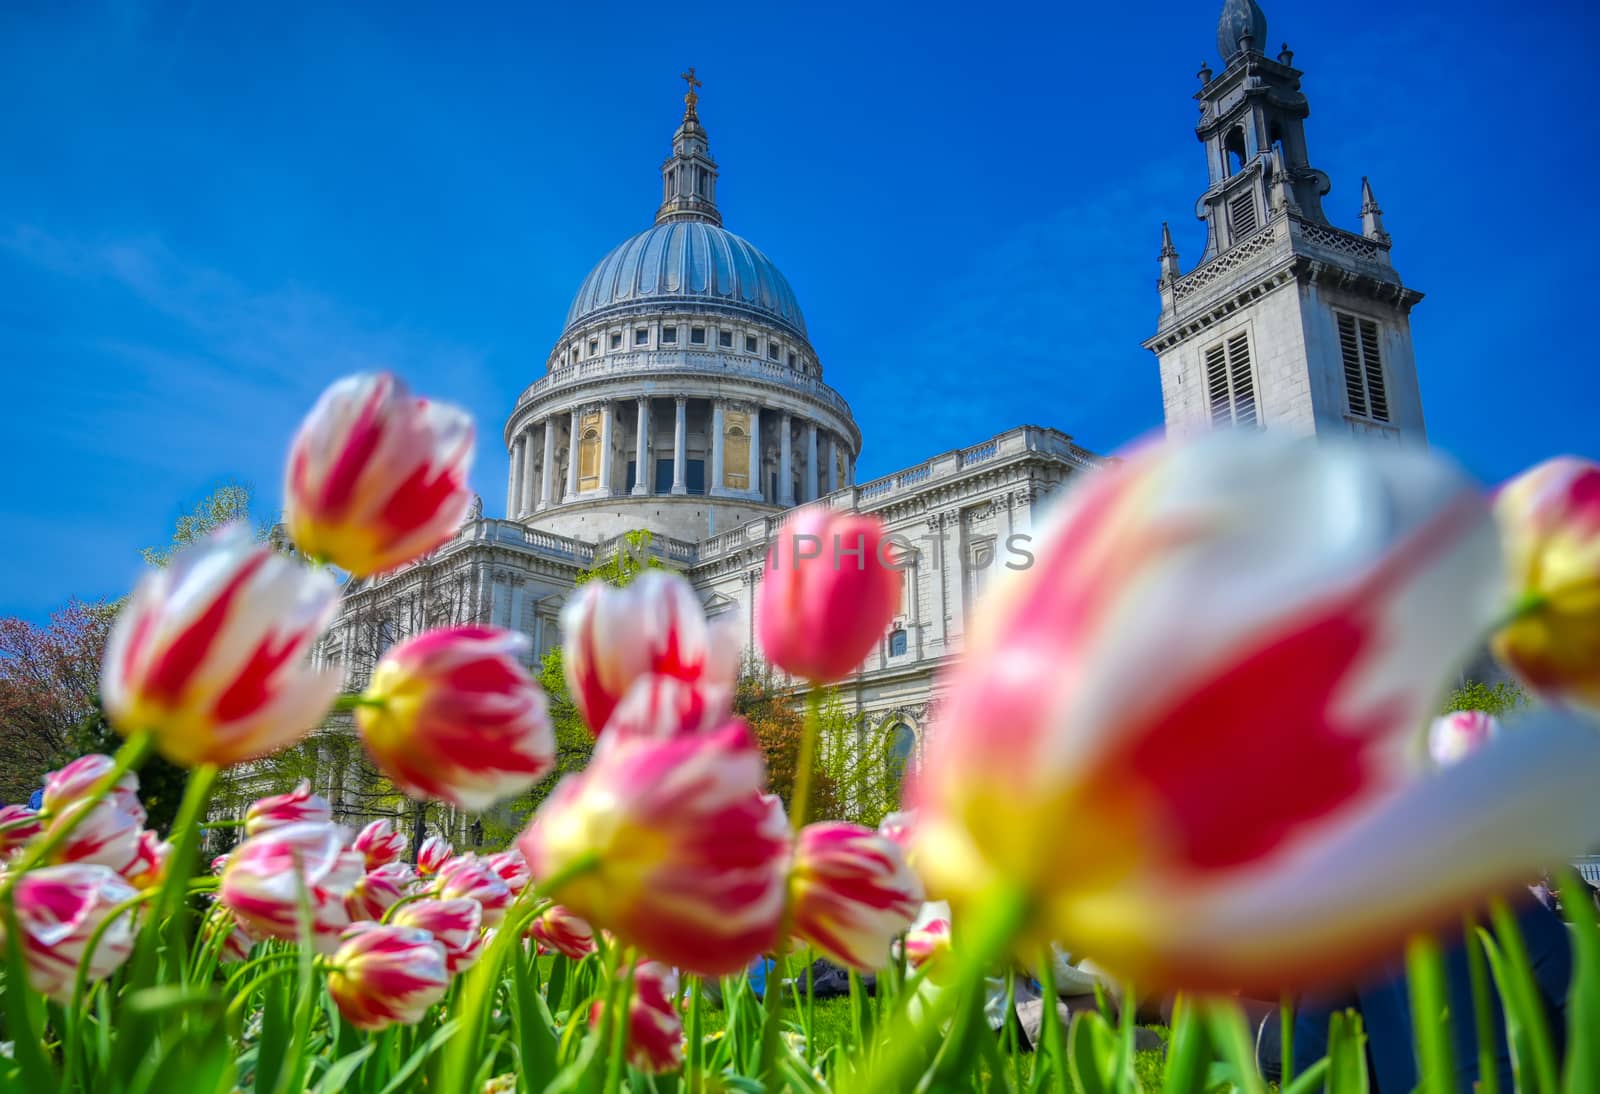 St. Paul's Cathedral in London, UK by jbyard22